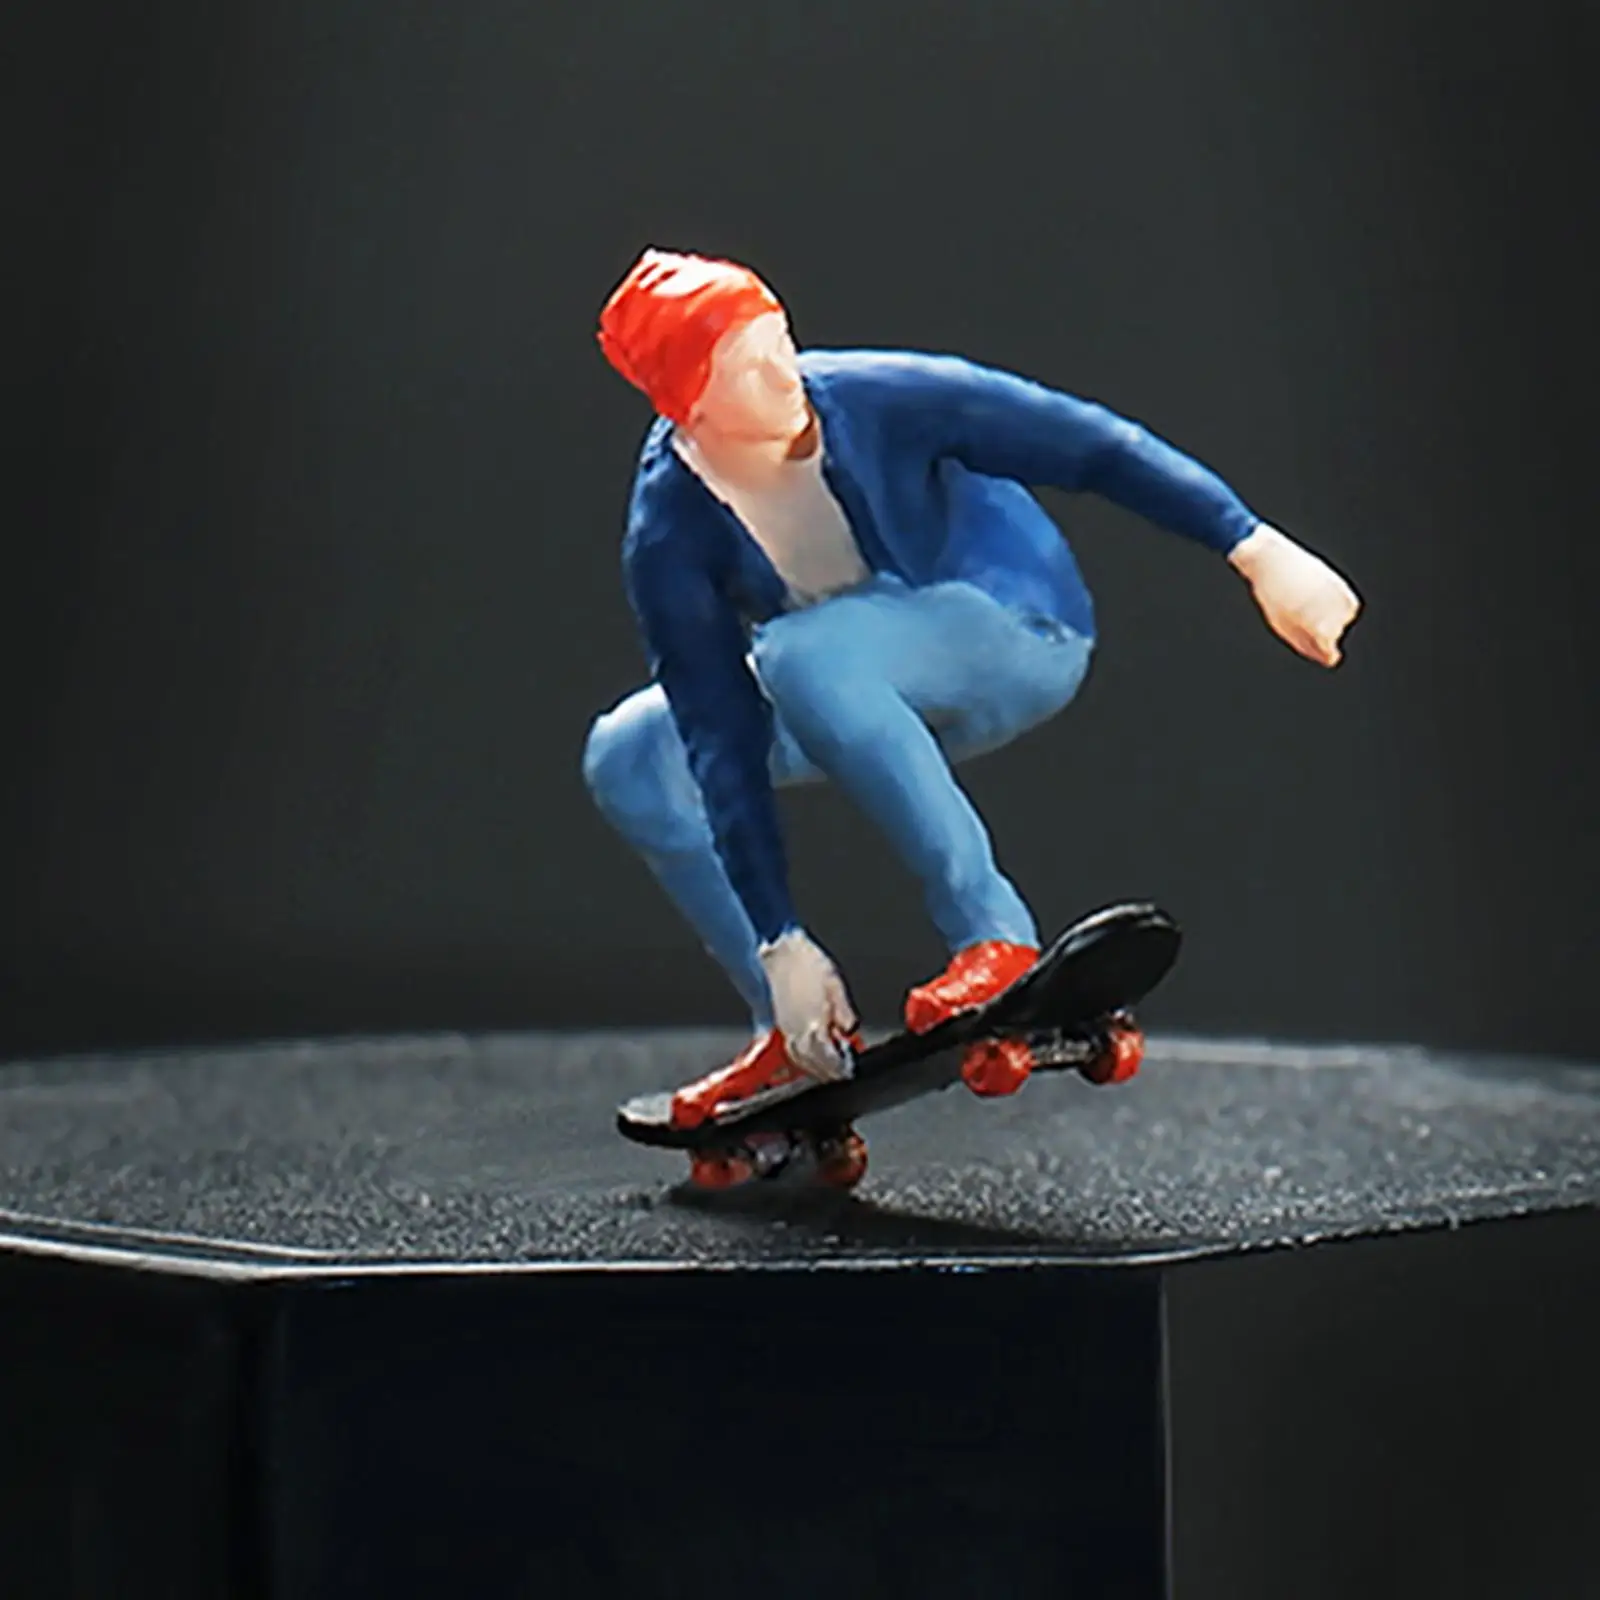 1/64 Miniature Figure Skateboard Man Painted Model Building Kits for Architecture Model Collections DIY Projects Street Railway